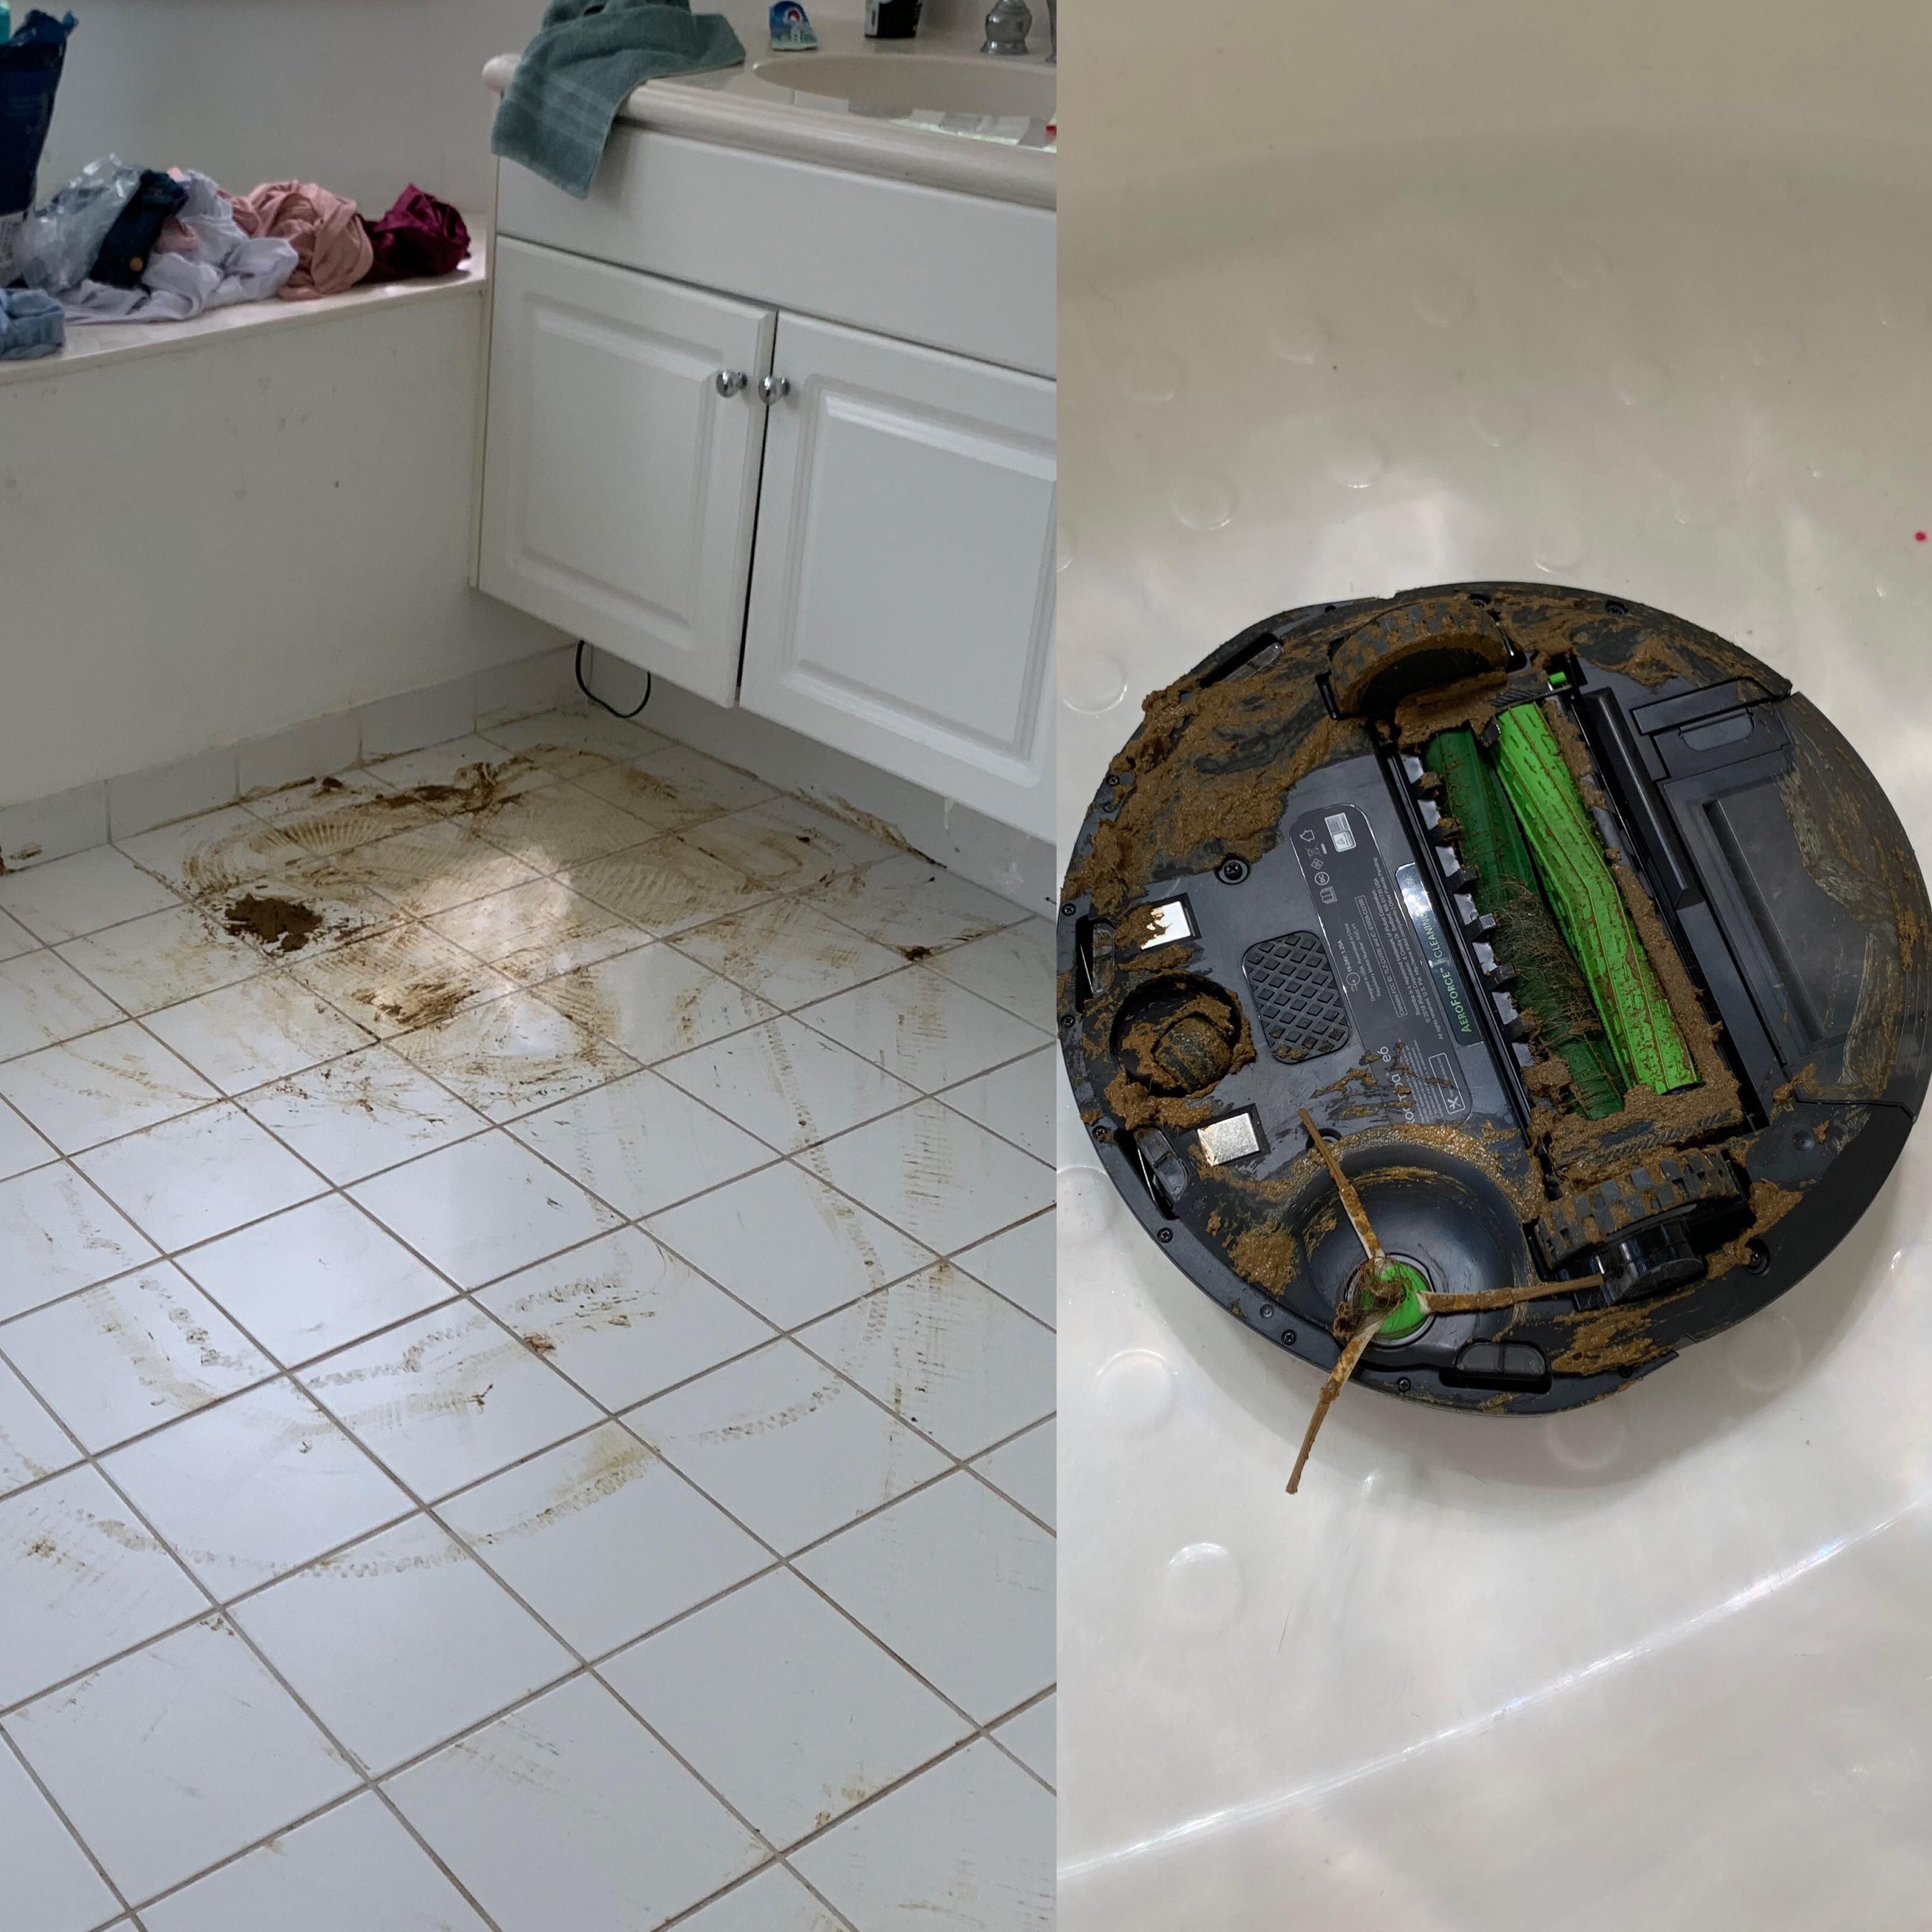 My new Roomba ran over my dog’s shit and proceeded to “clean” the rest of my house.